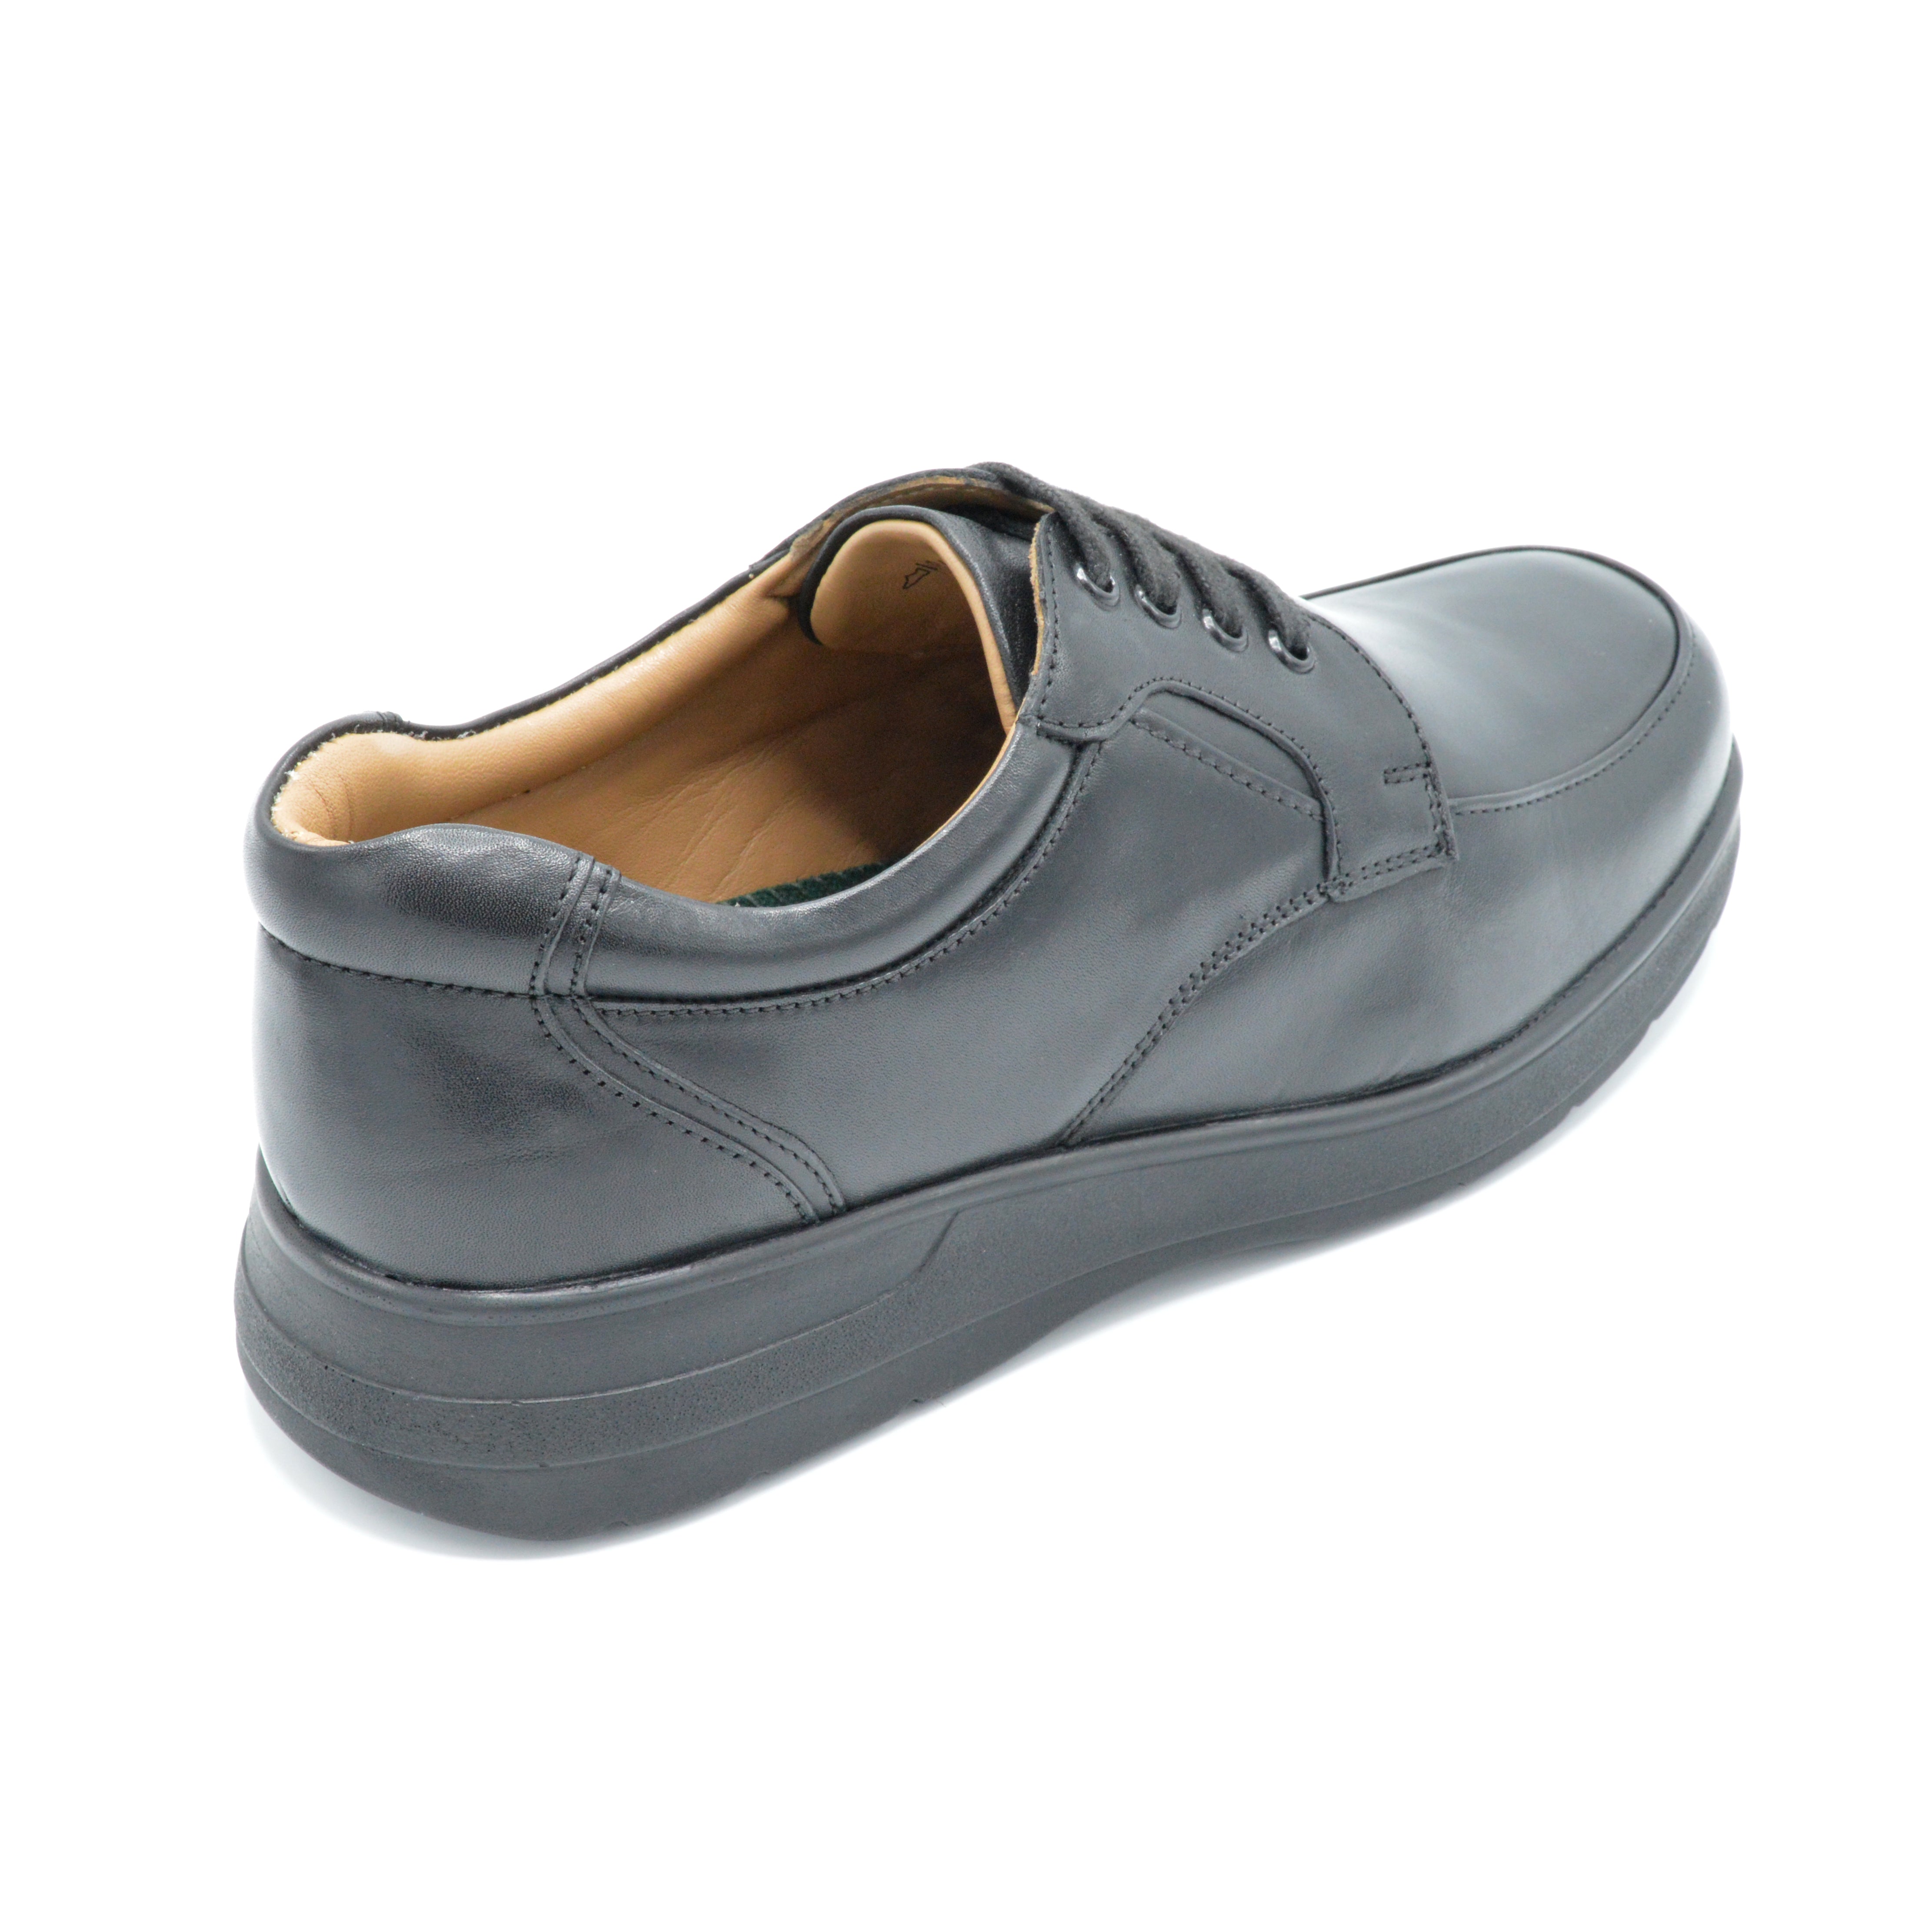 Comfortable Super Soft Extra Wide Shoe For Bunions